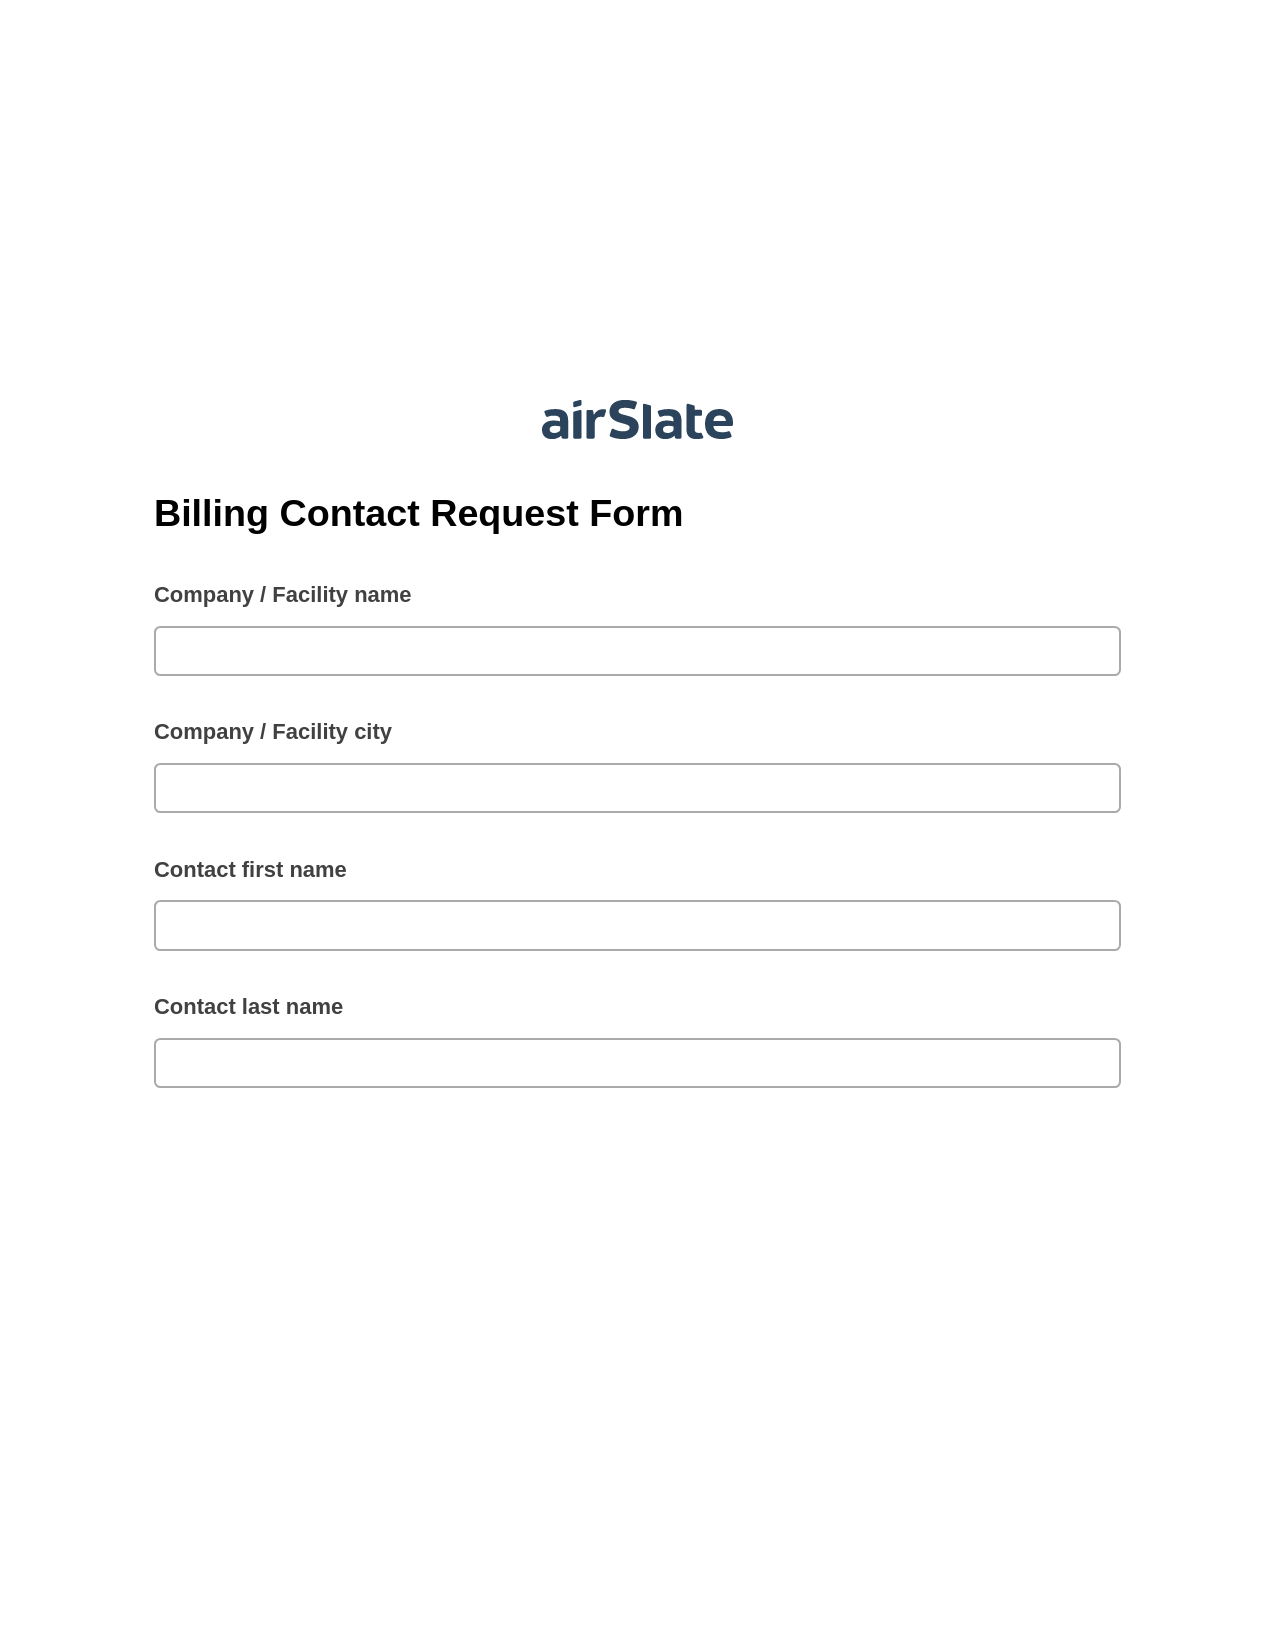 Multirole Billing Contact Request Form Pre-fill Dropdowns from MySQL Bot, Create NetSuite Records Bot, Export to NetSuite Record Bot